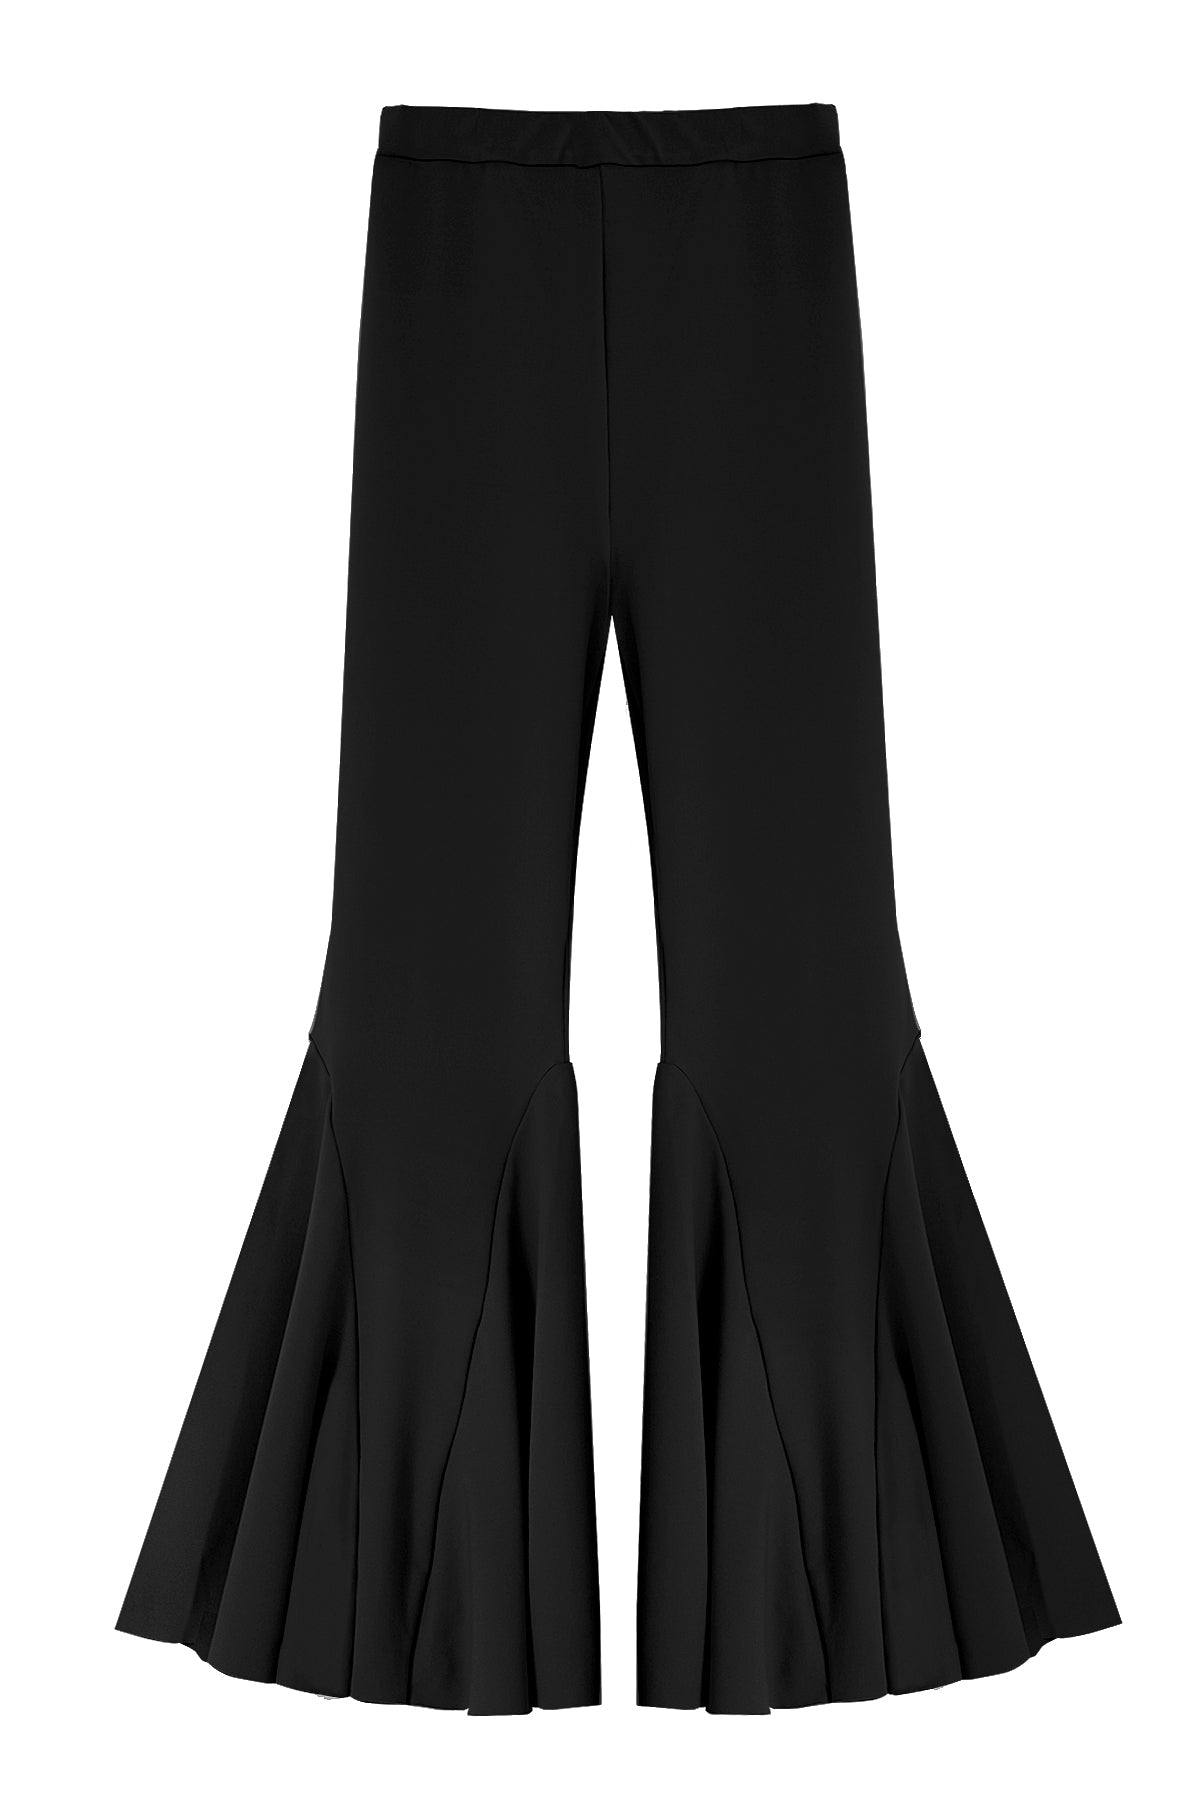  Sunzel: Flare Pants with No Front Seam